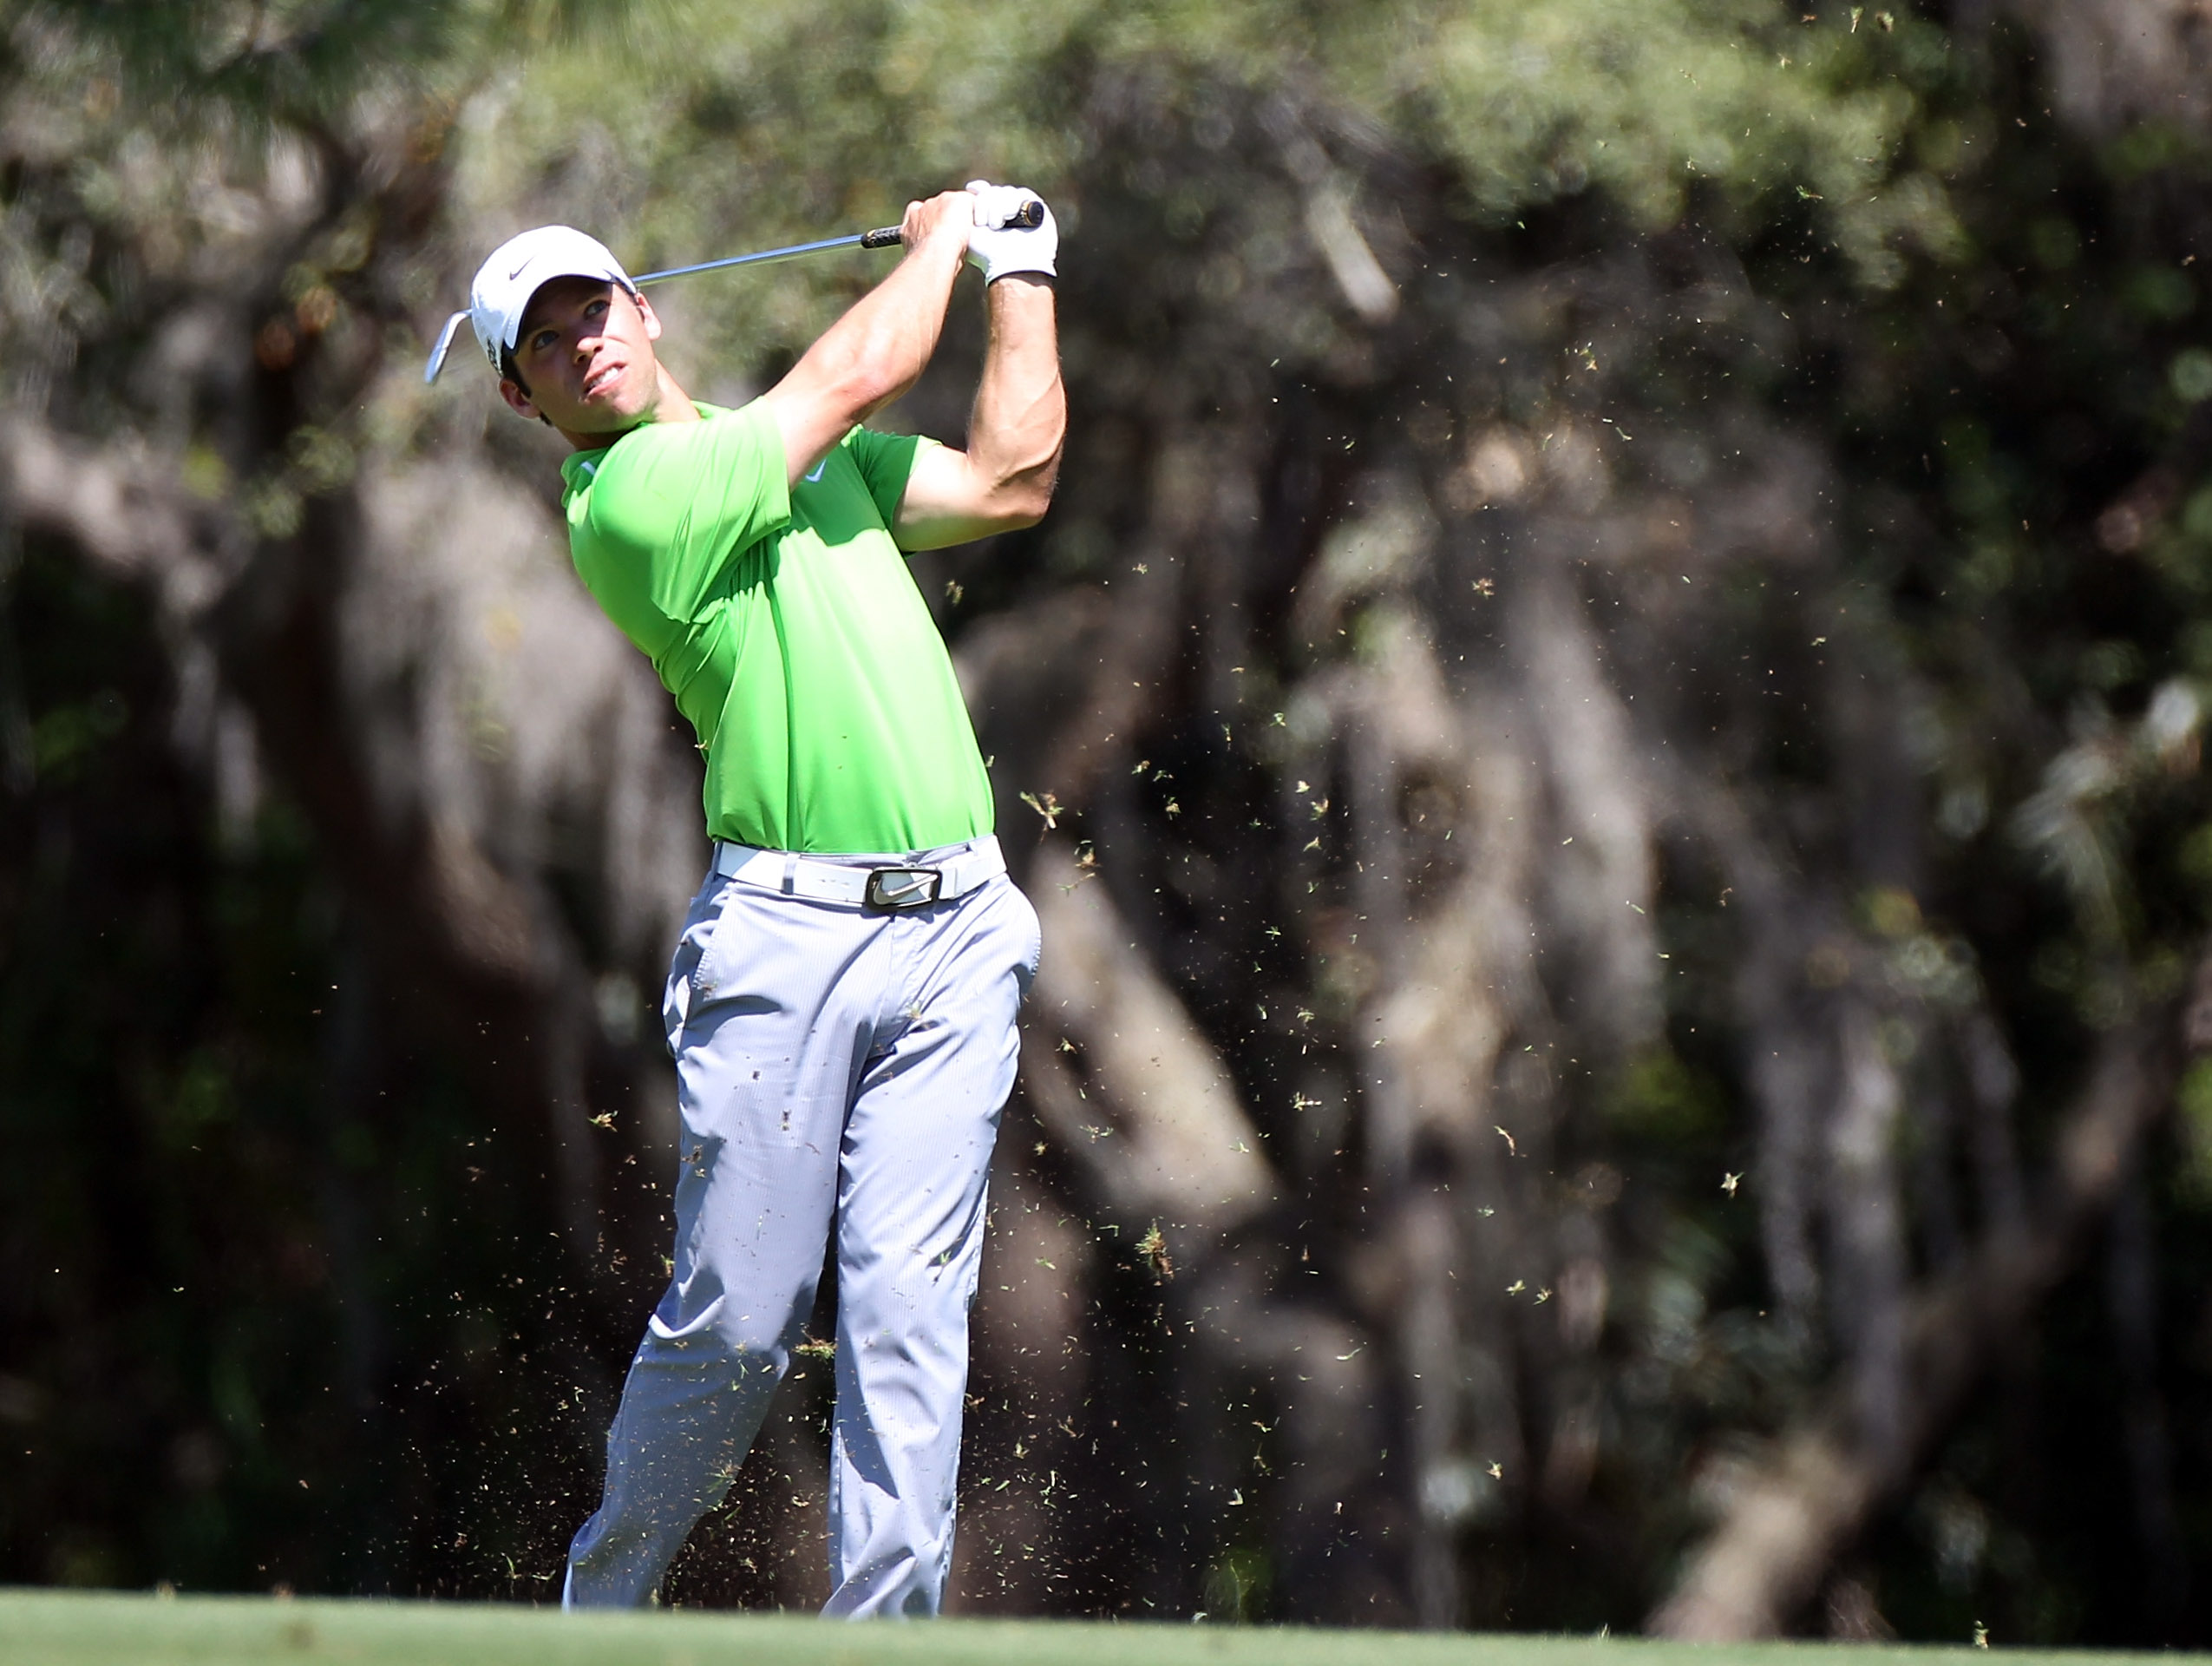 PALM HARBOR, FL - MARCH 17:  Paul Casey of England plays a shot on the 7th hole during the first round of the Transitions Championship at Innisbrook Resort and Golf Club on March 17, 2011 in Palm Harbor, Florida.  (Photo by Sam Greenwood/Getty Images)